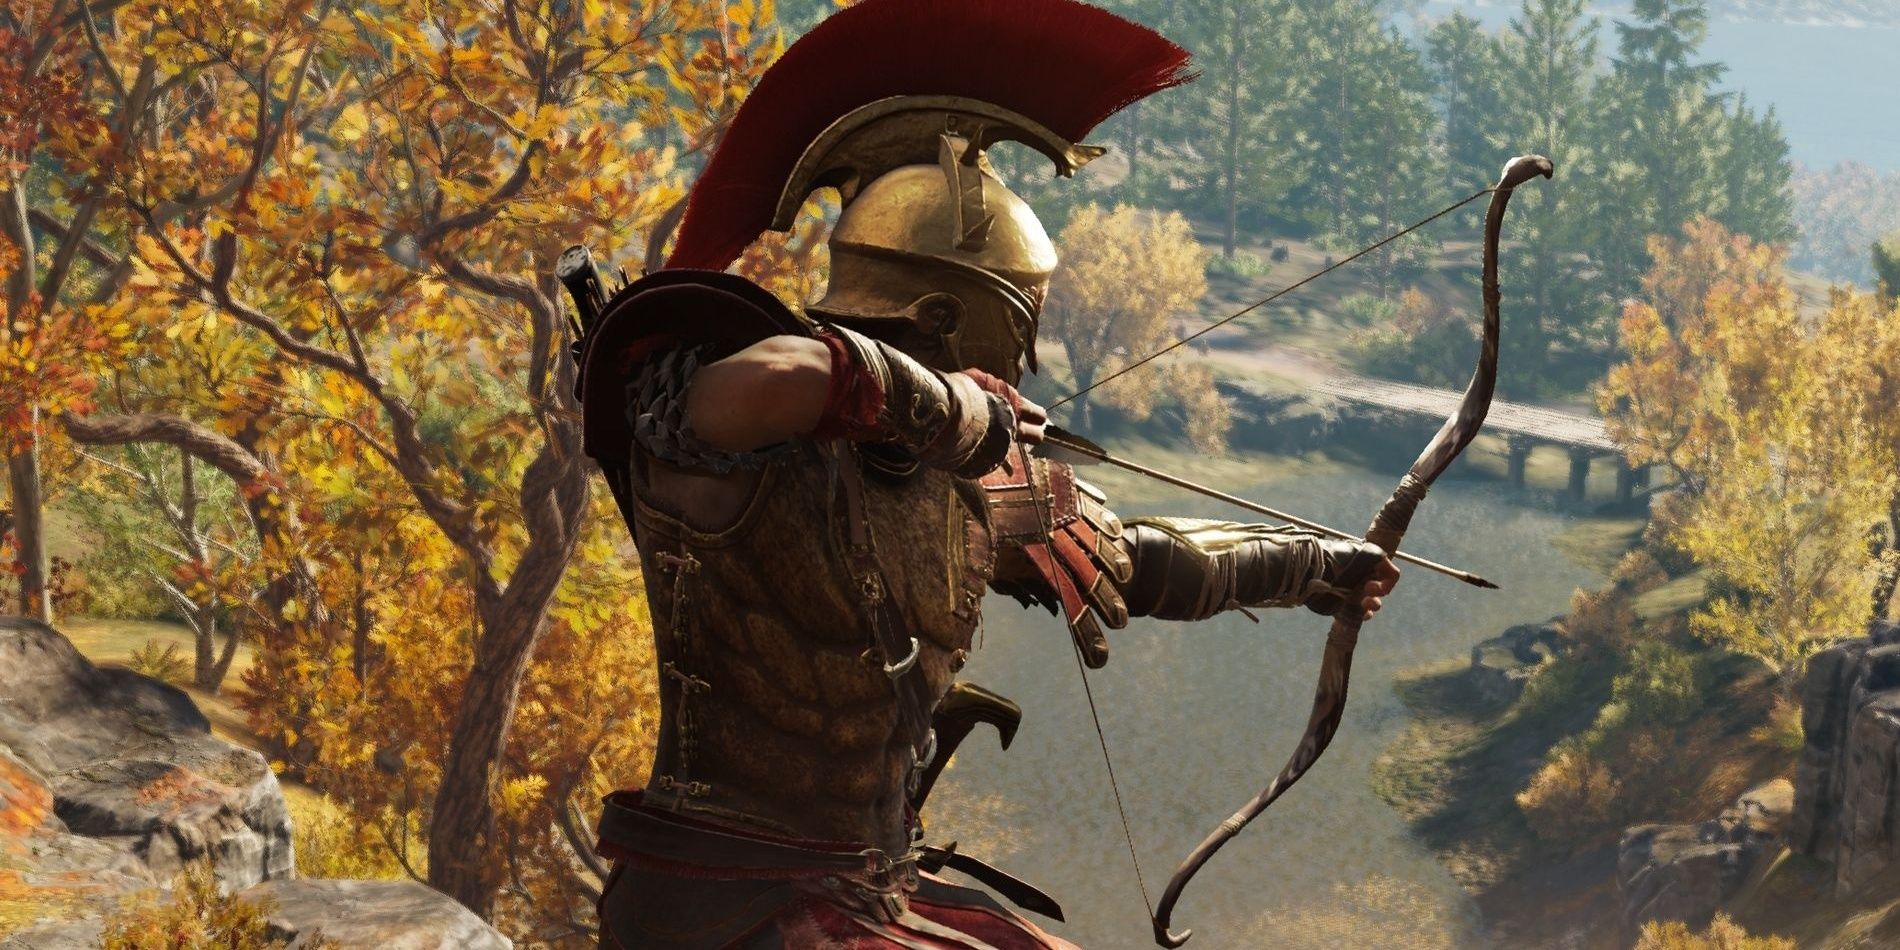 The player firing a bow in Assassin's Creed Odyssey